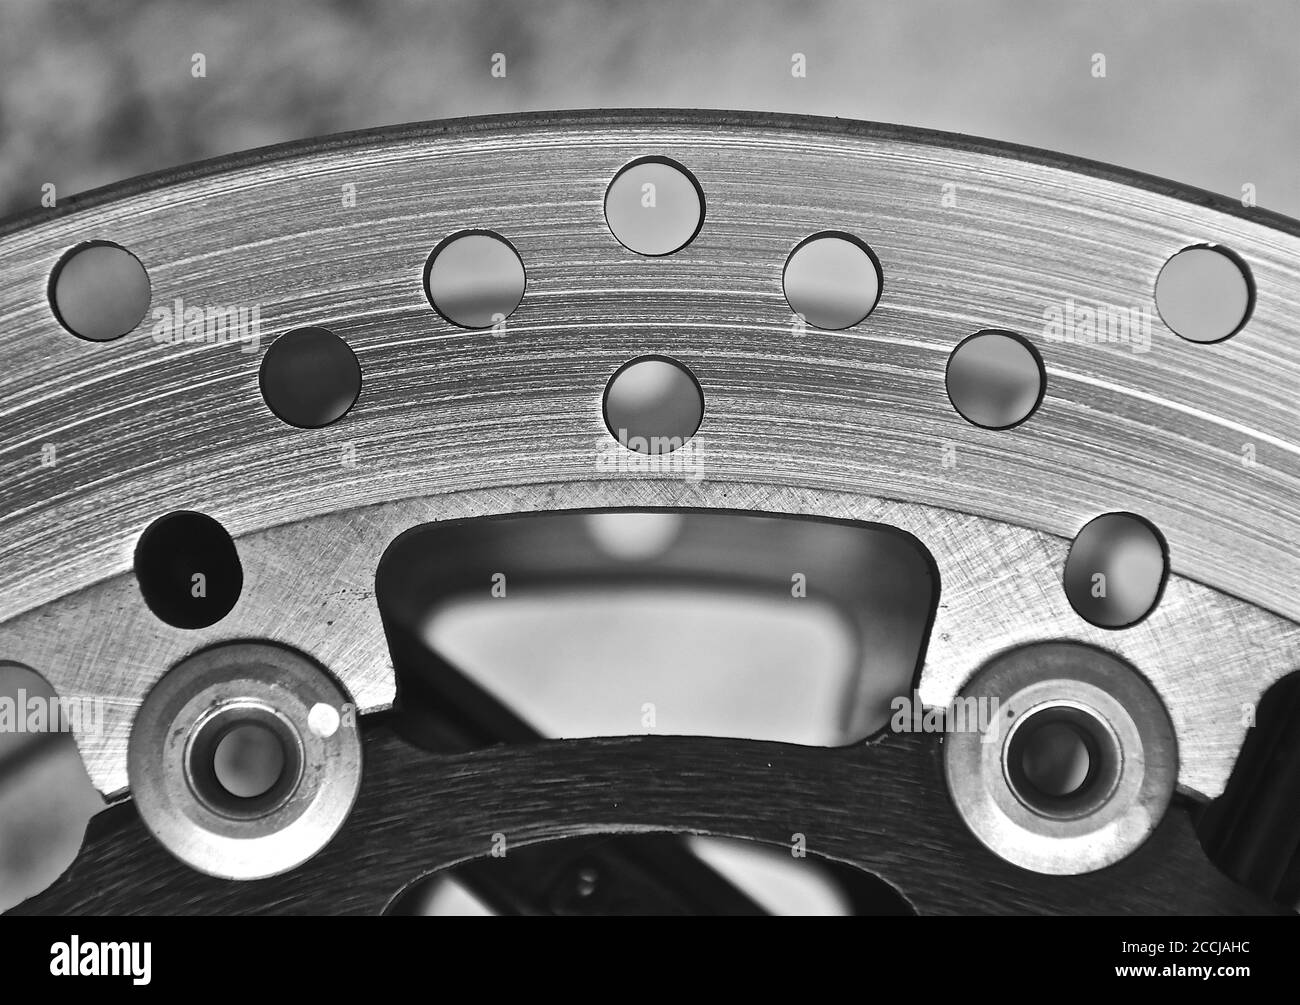 A macro image of stainless steel cogs and and plates as found in a disc brake system on a high end classic motorbike. Stock Photo